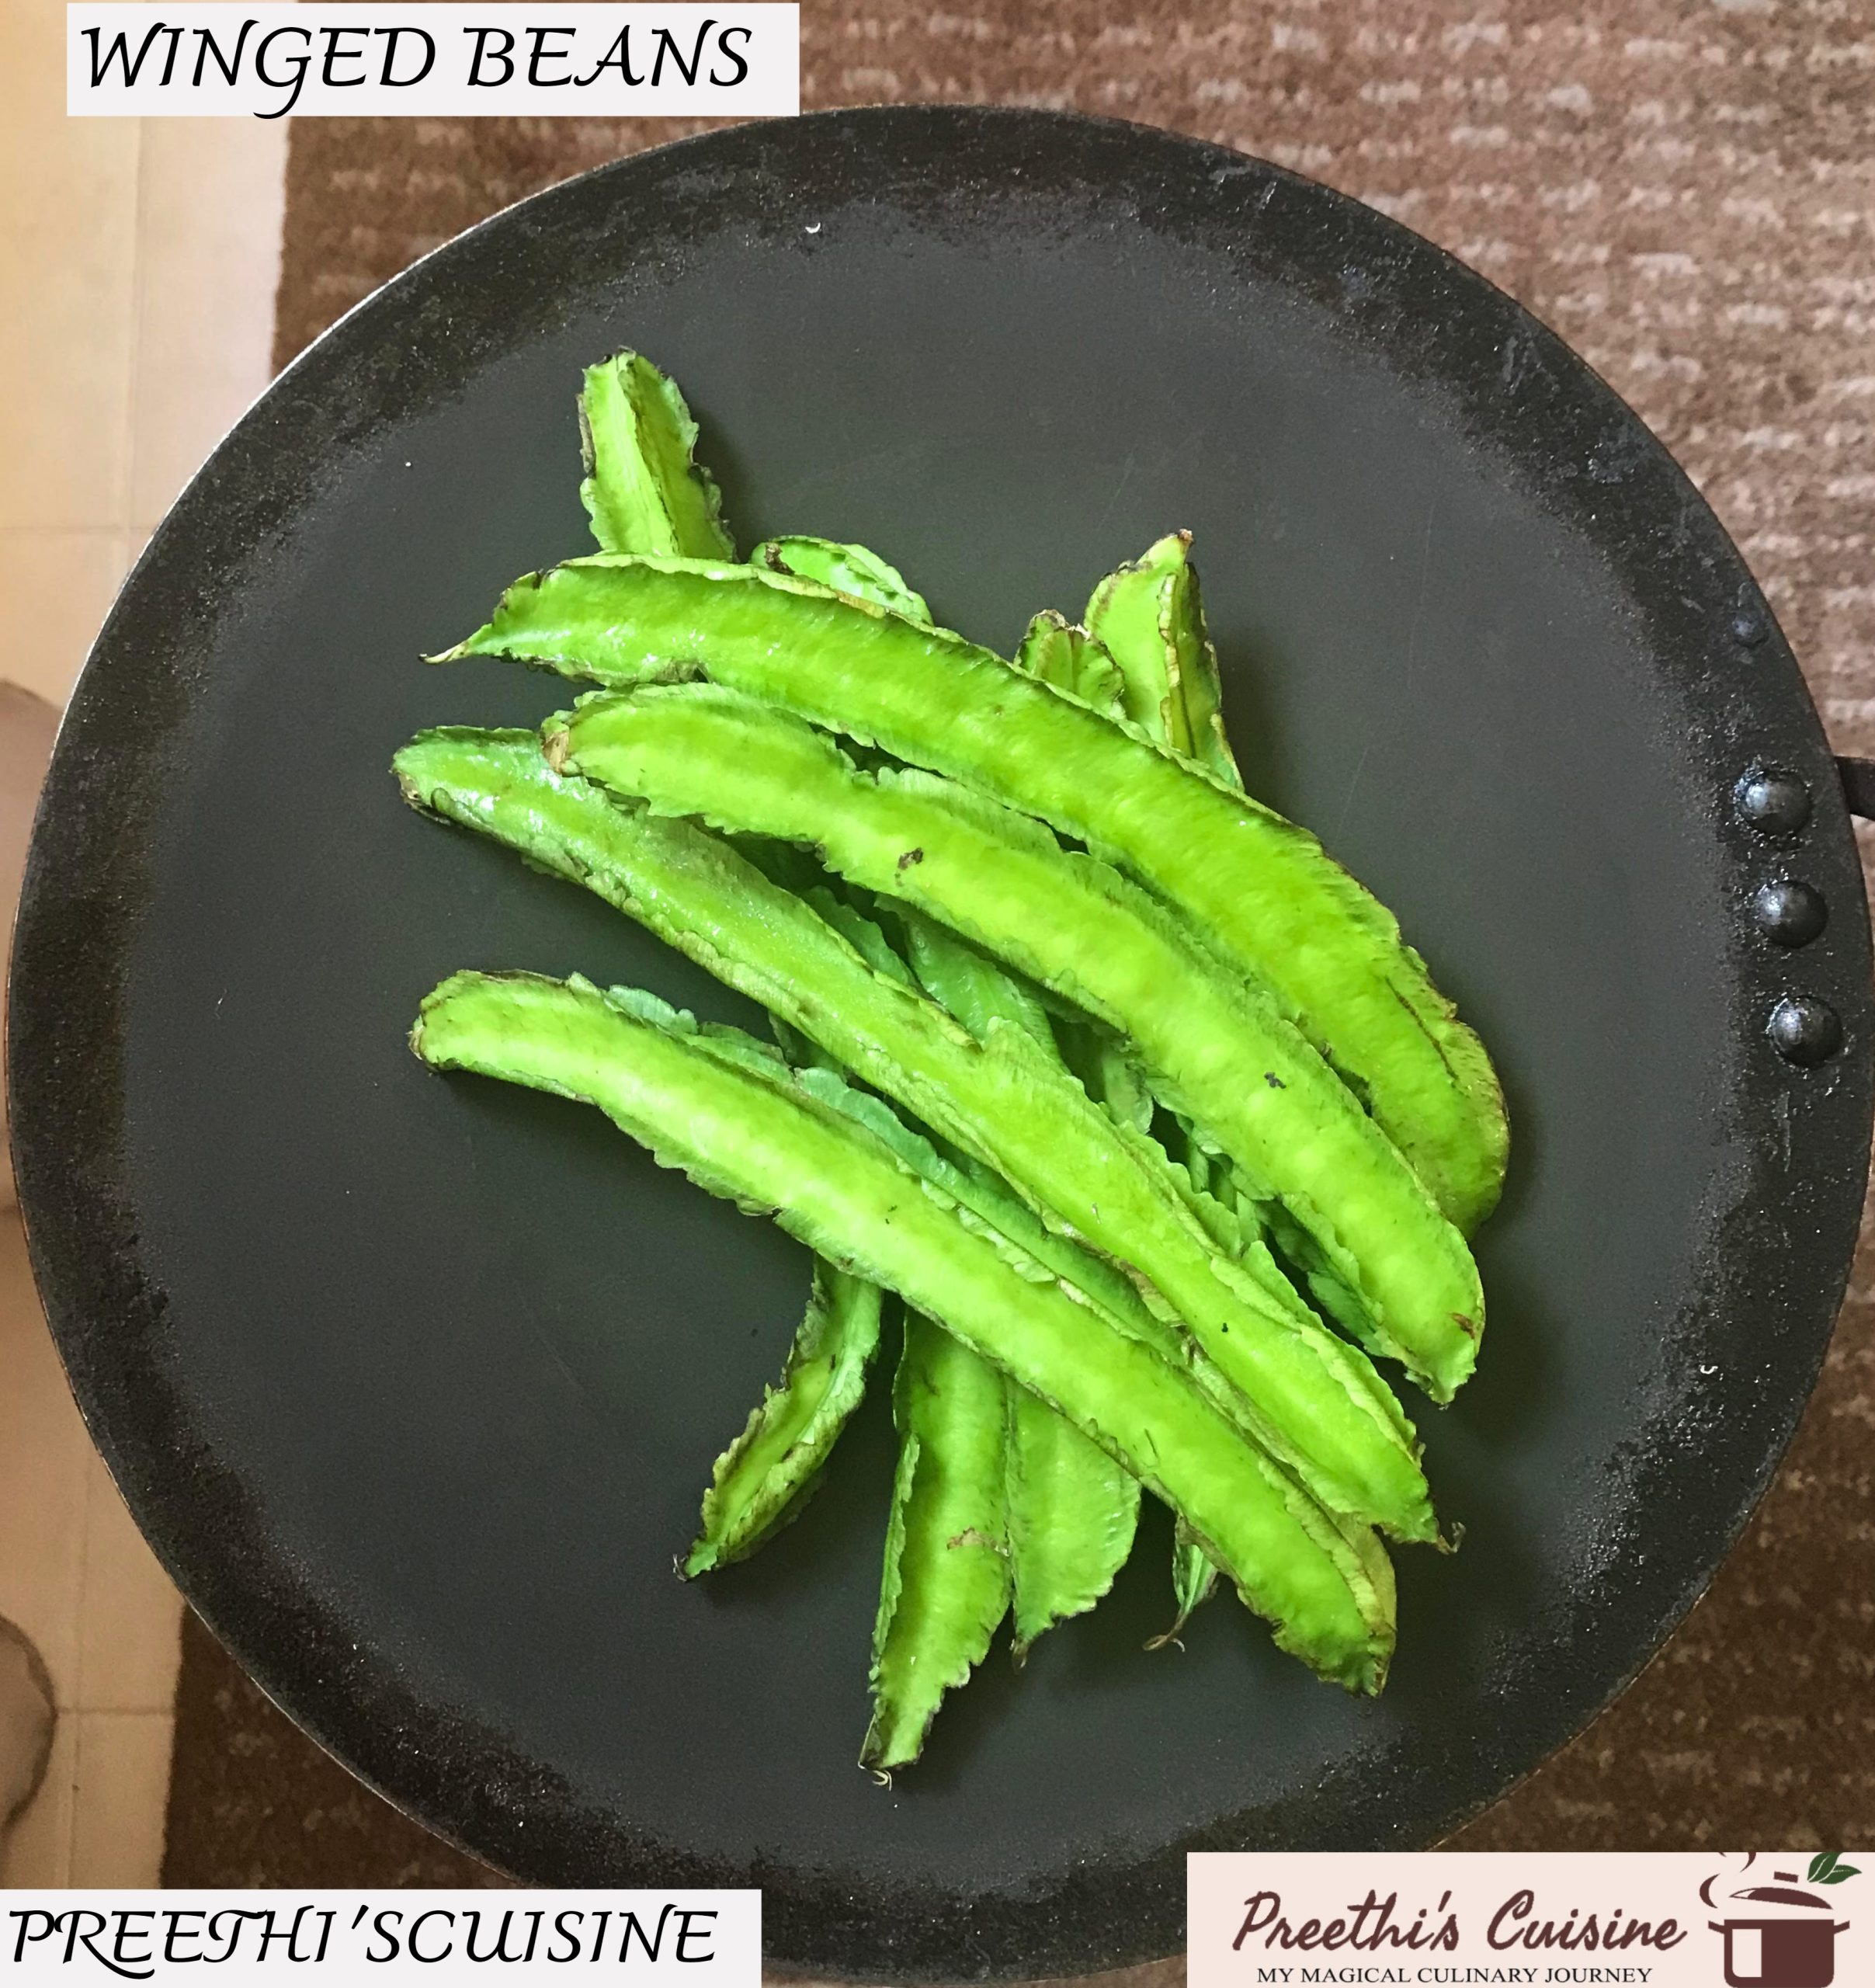 WINGED BEANS